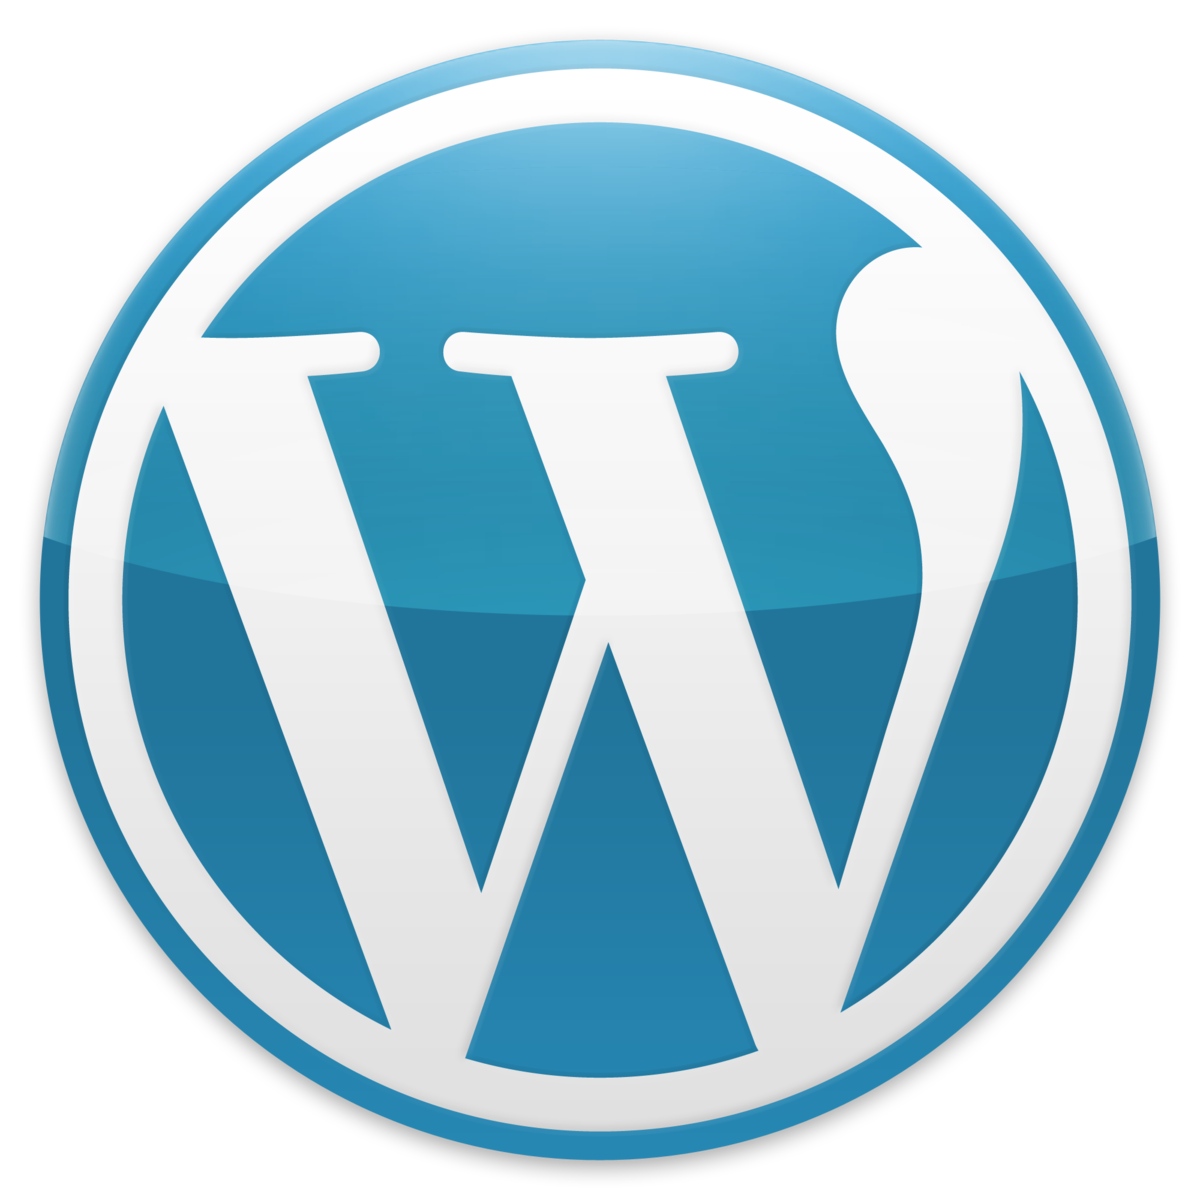 Symphysis Marketing has extensive experience with Wordpress for startups